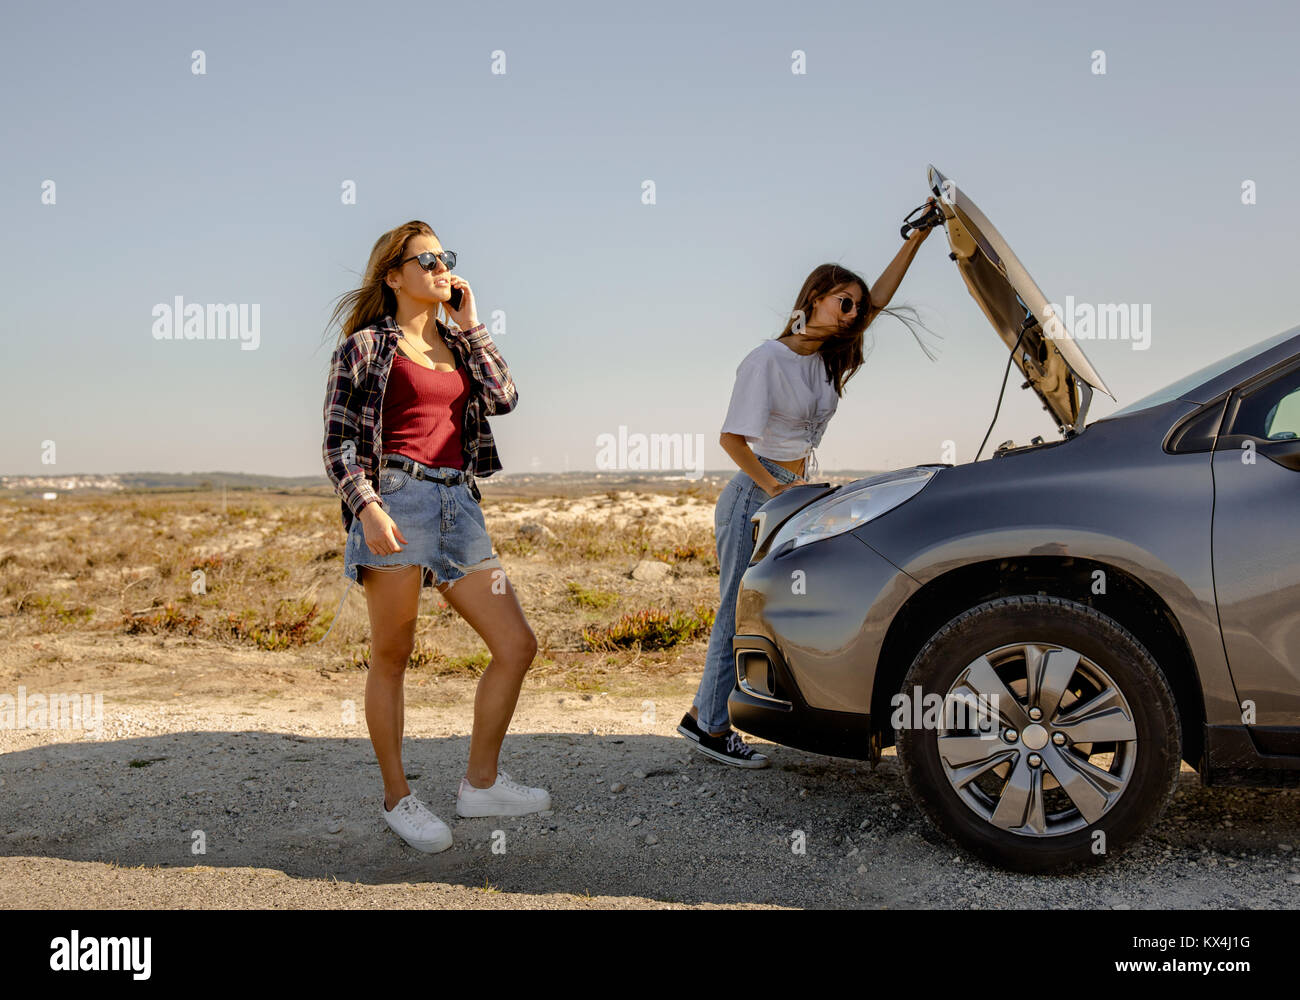 Woman near a car break down with engine trouble and her friend calls for emergency assistance Stock Photo